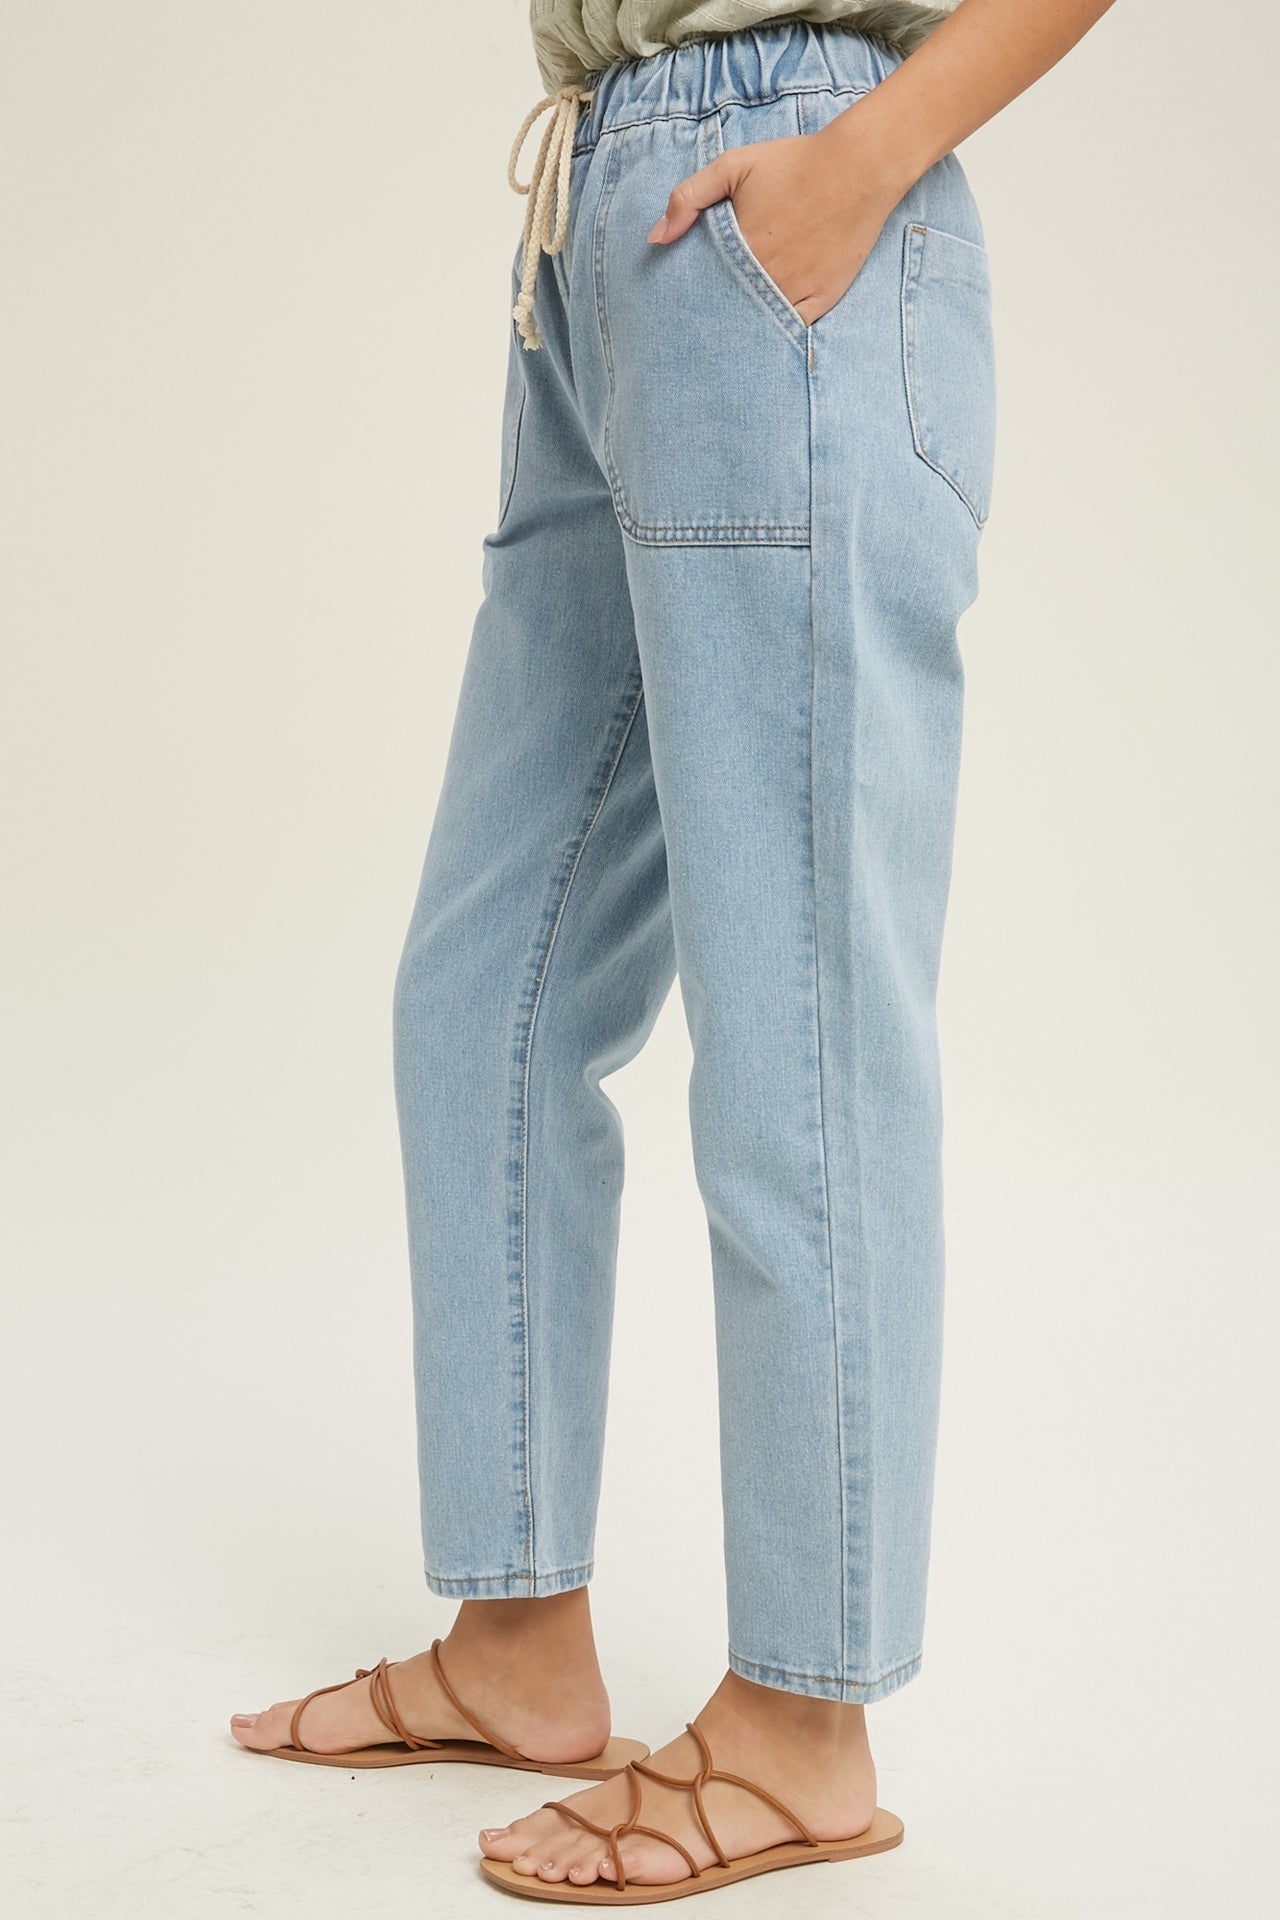 The Brit Tie Jeans (One Left - Size M)